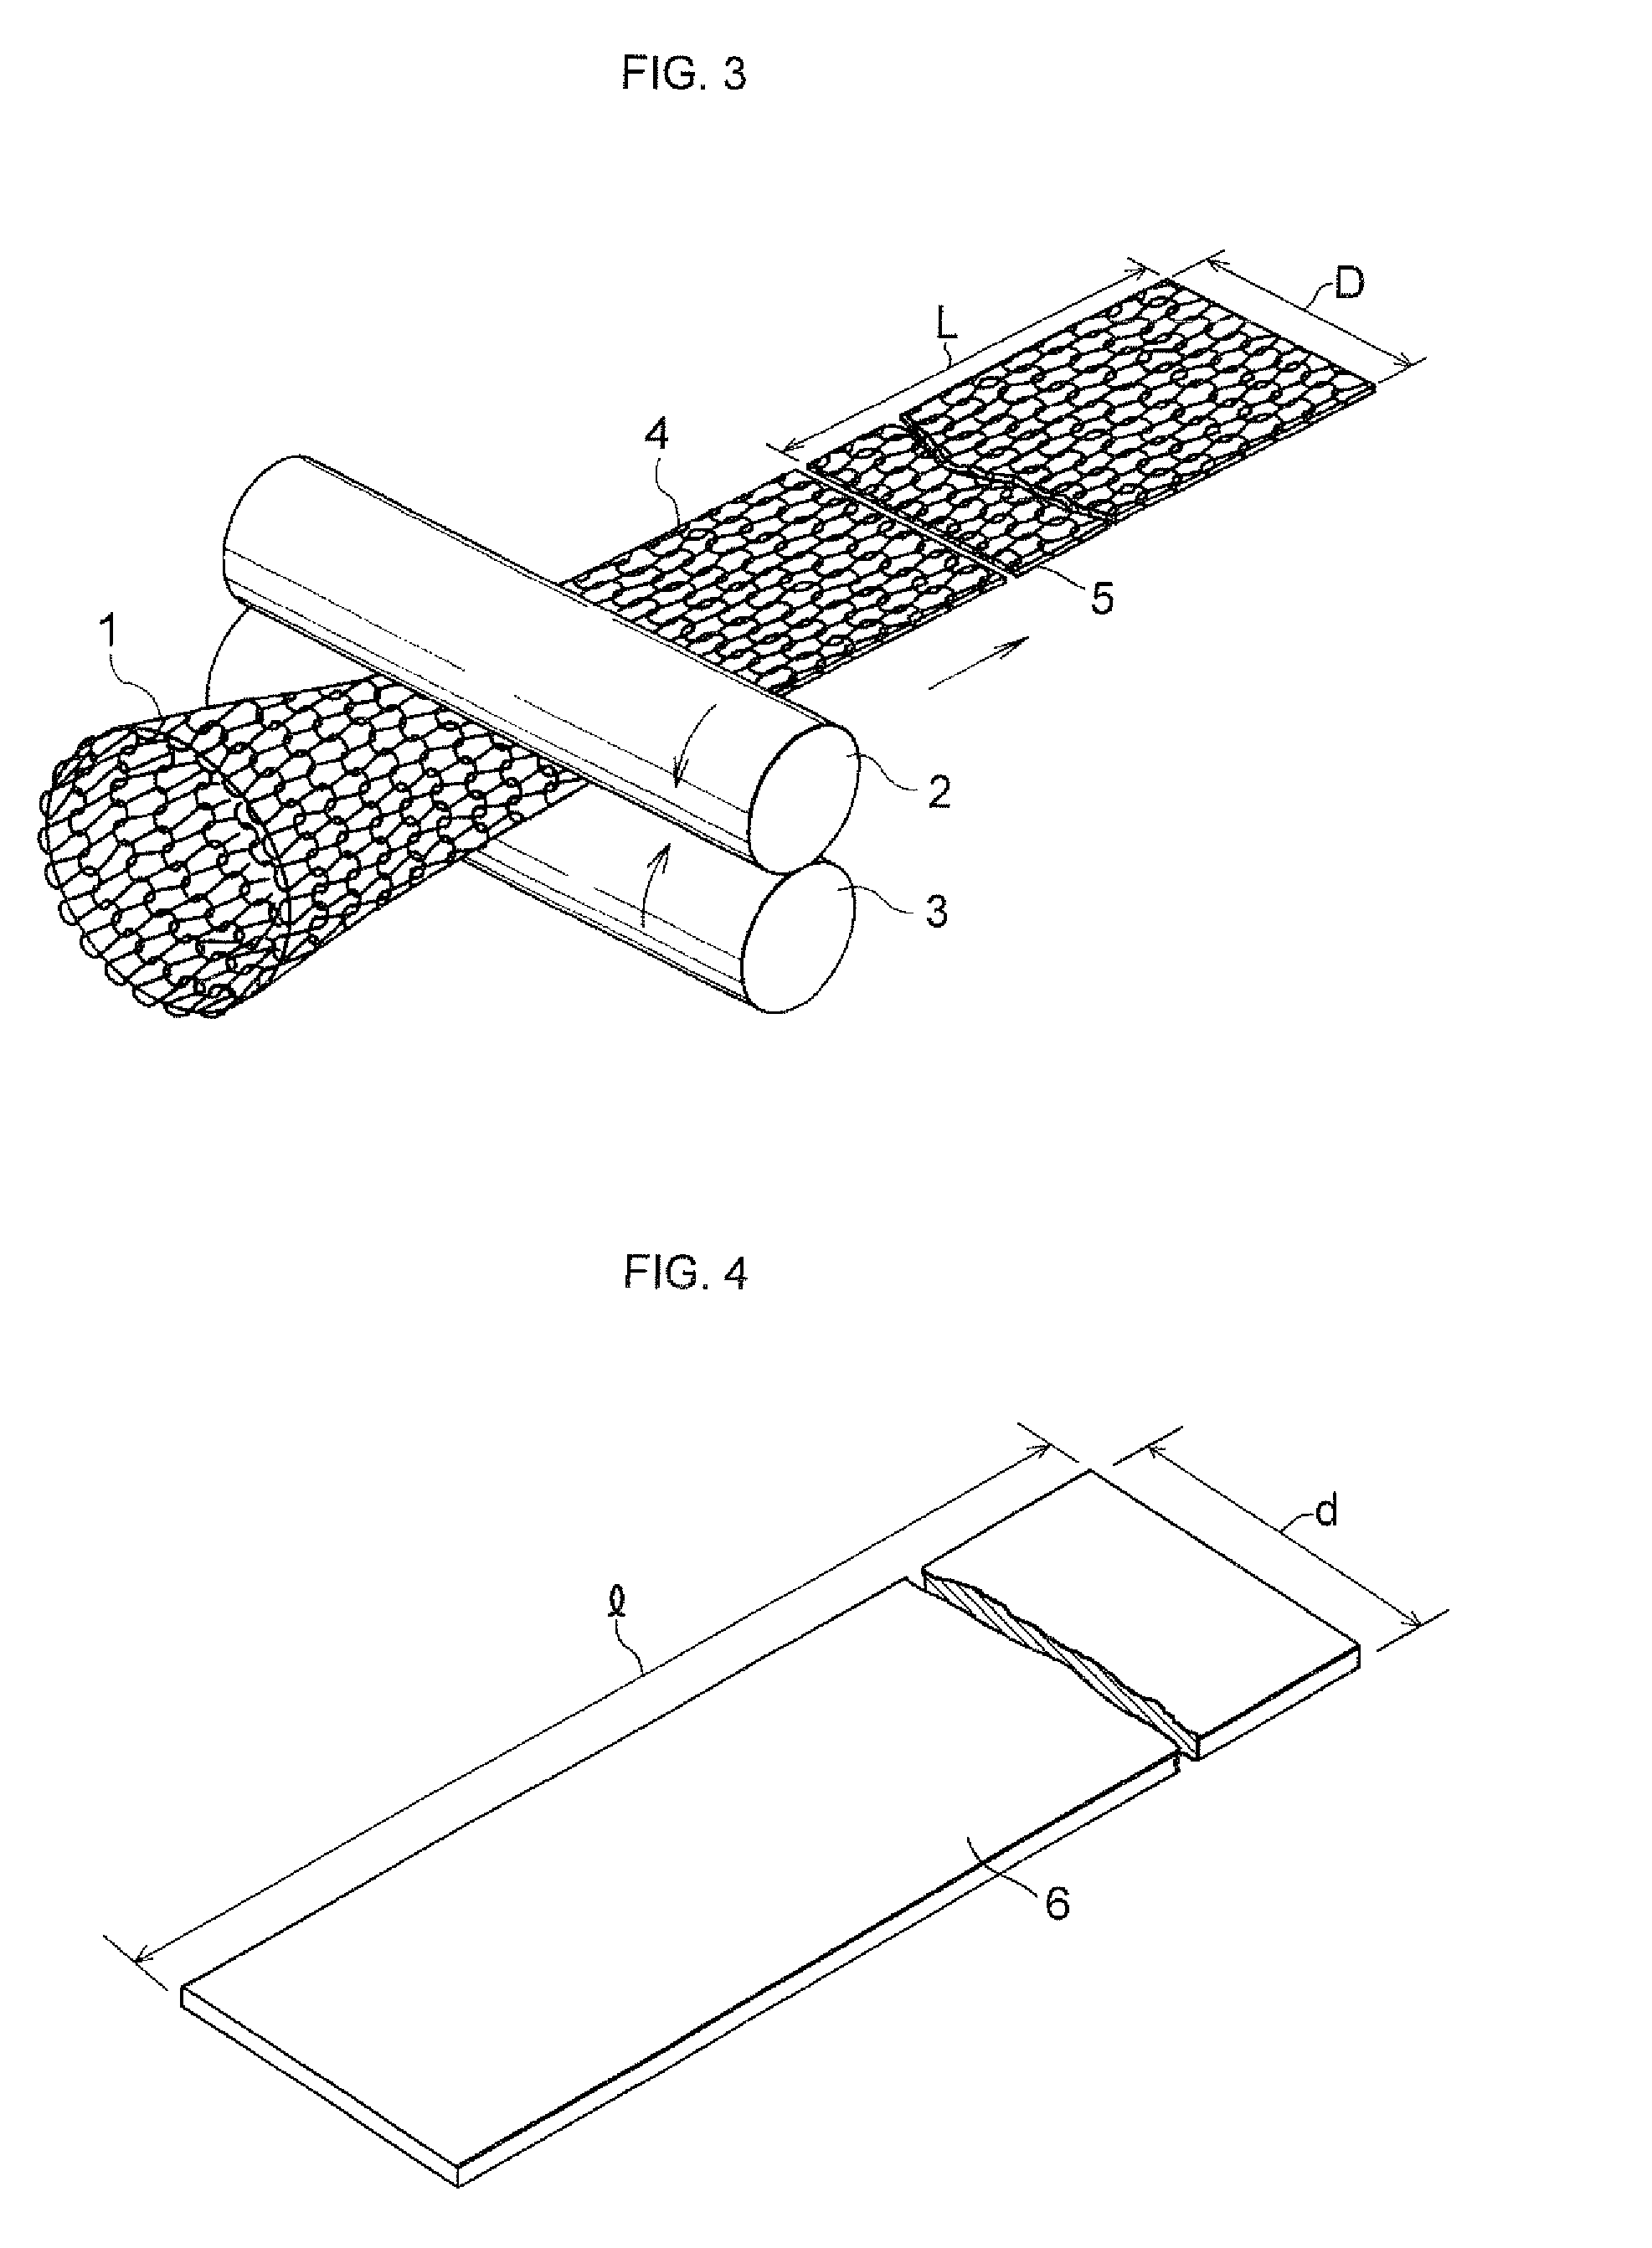 Spherical annular seal member and method of manufacturing the same